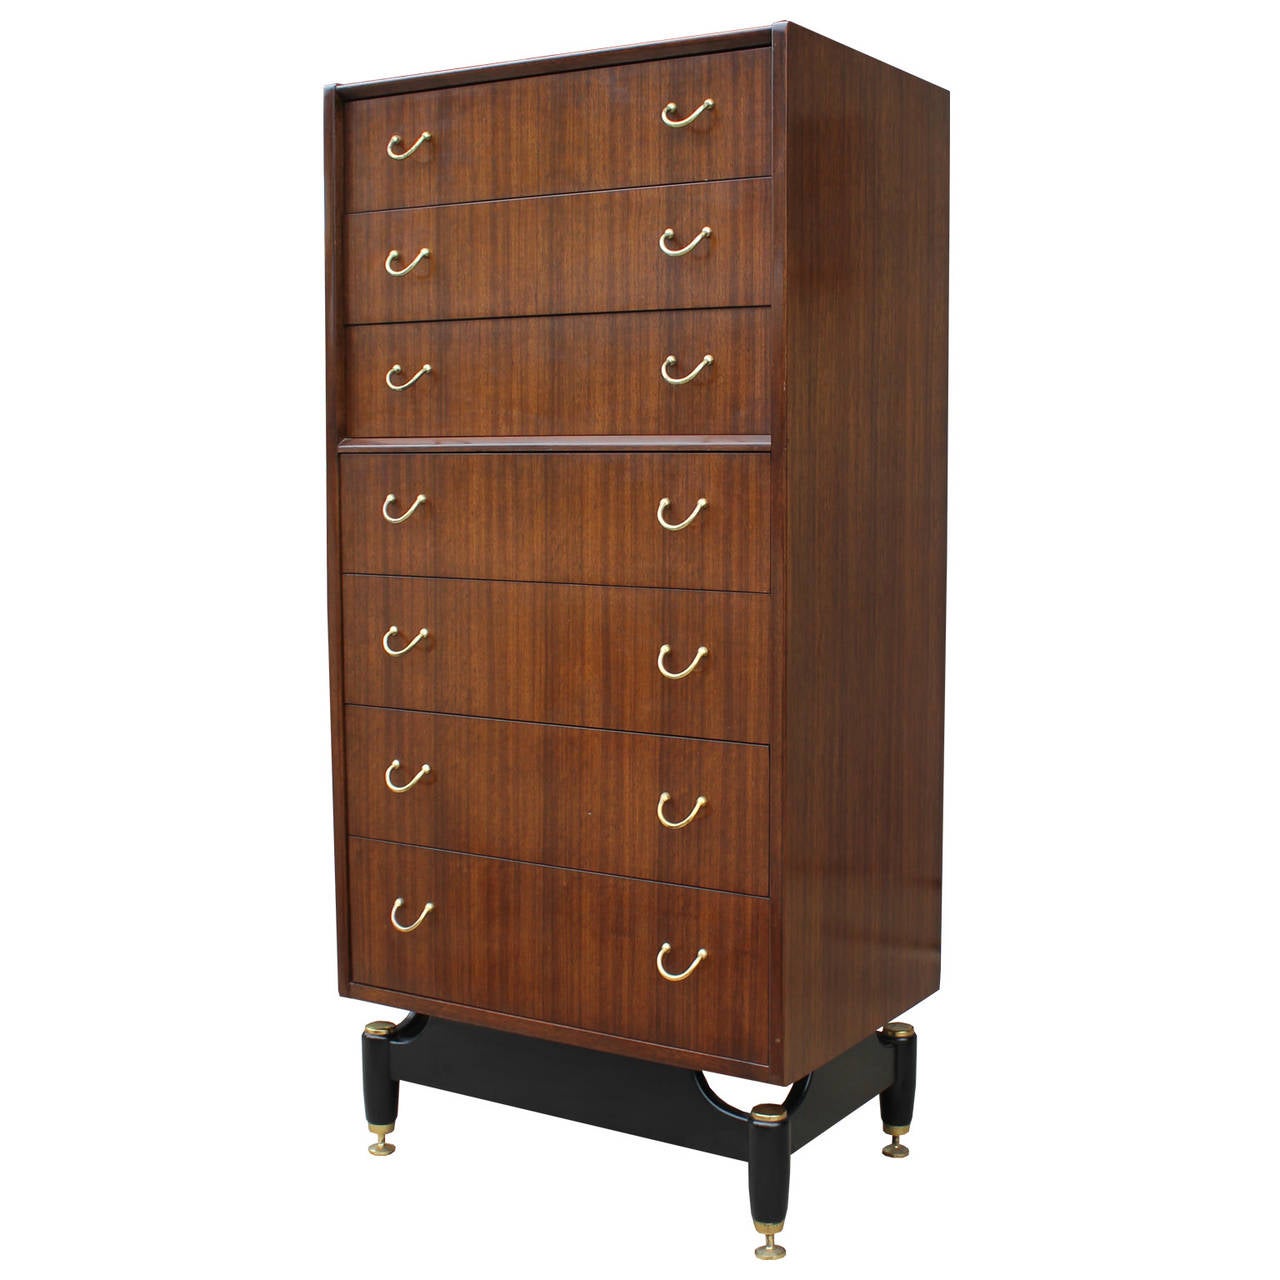 Wonderful lingerie chest sits atop a black lacquered base with shiny brass levelers and accents.  Seven drawers provide ample storage.  Beautiful grain and excellent construction.